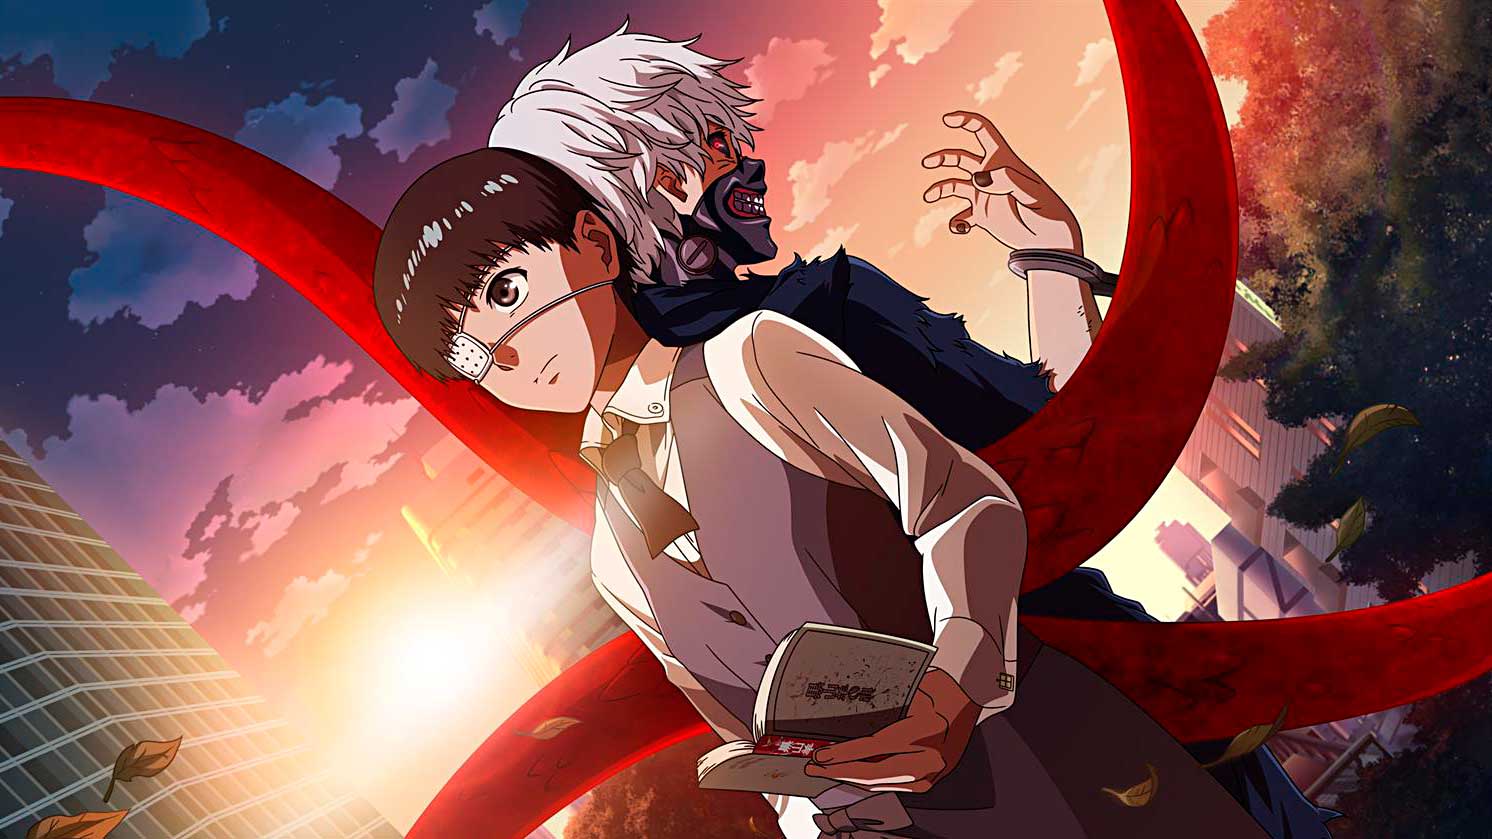 Tokyo Ghoul Fans Disappointed by Season 2 Need To Read the Manga